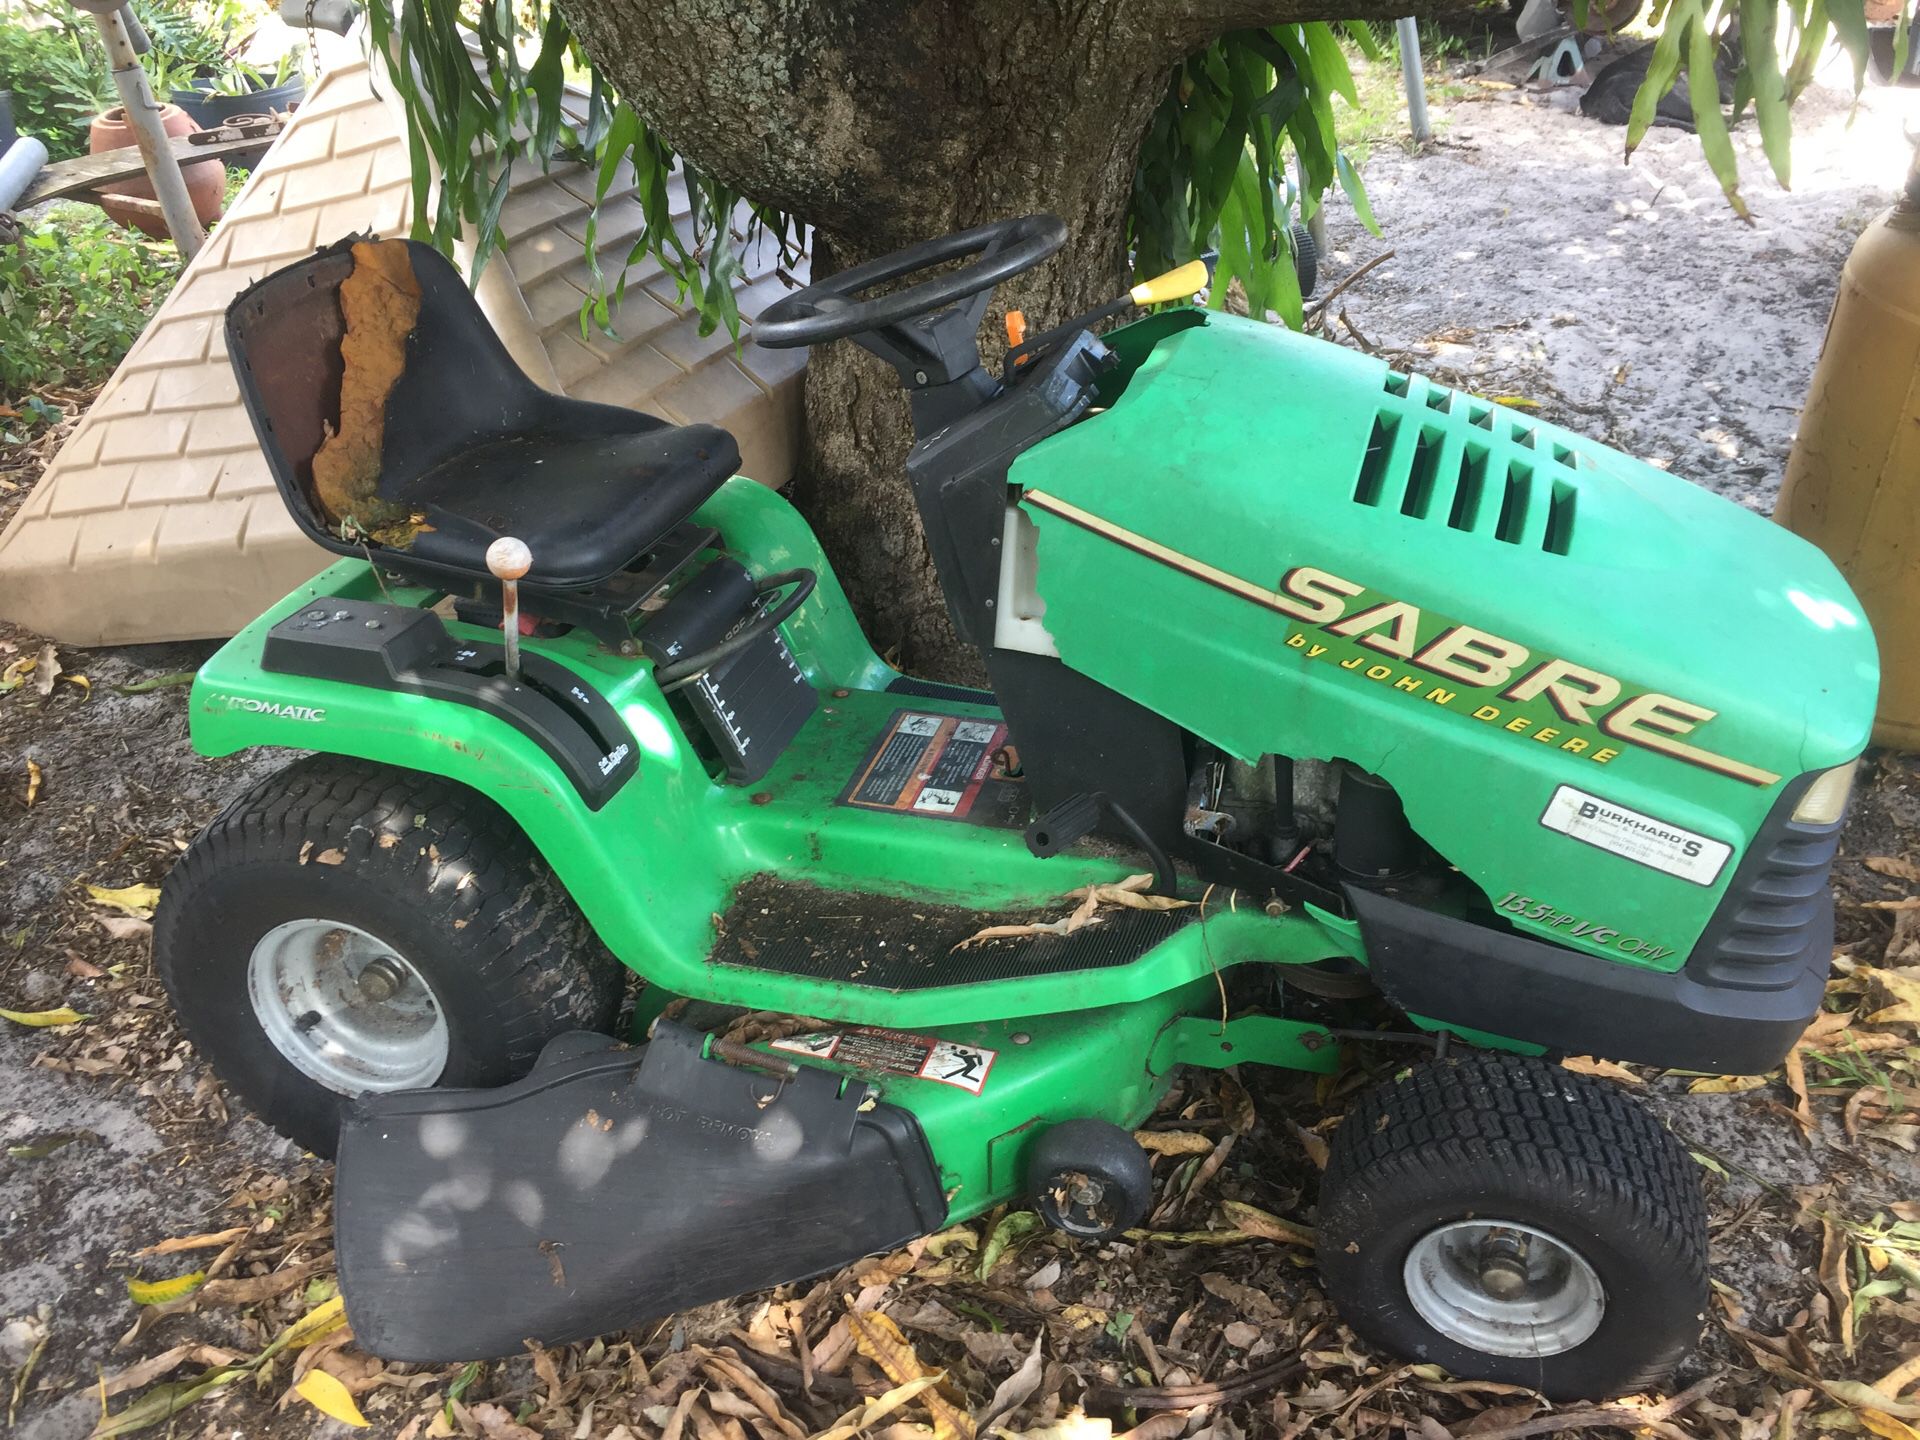 John Deere Sabre riding lawn mower / complete or parts .. Firm